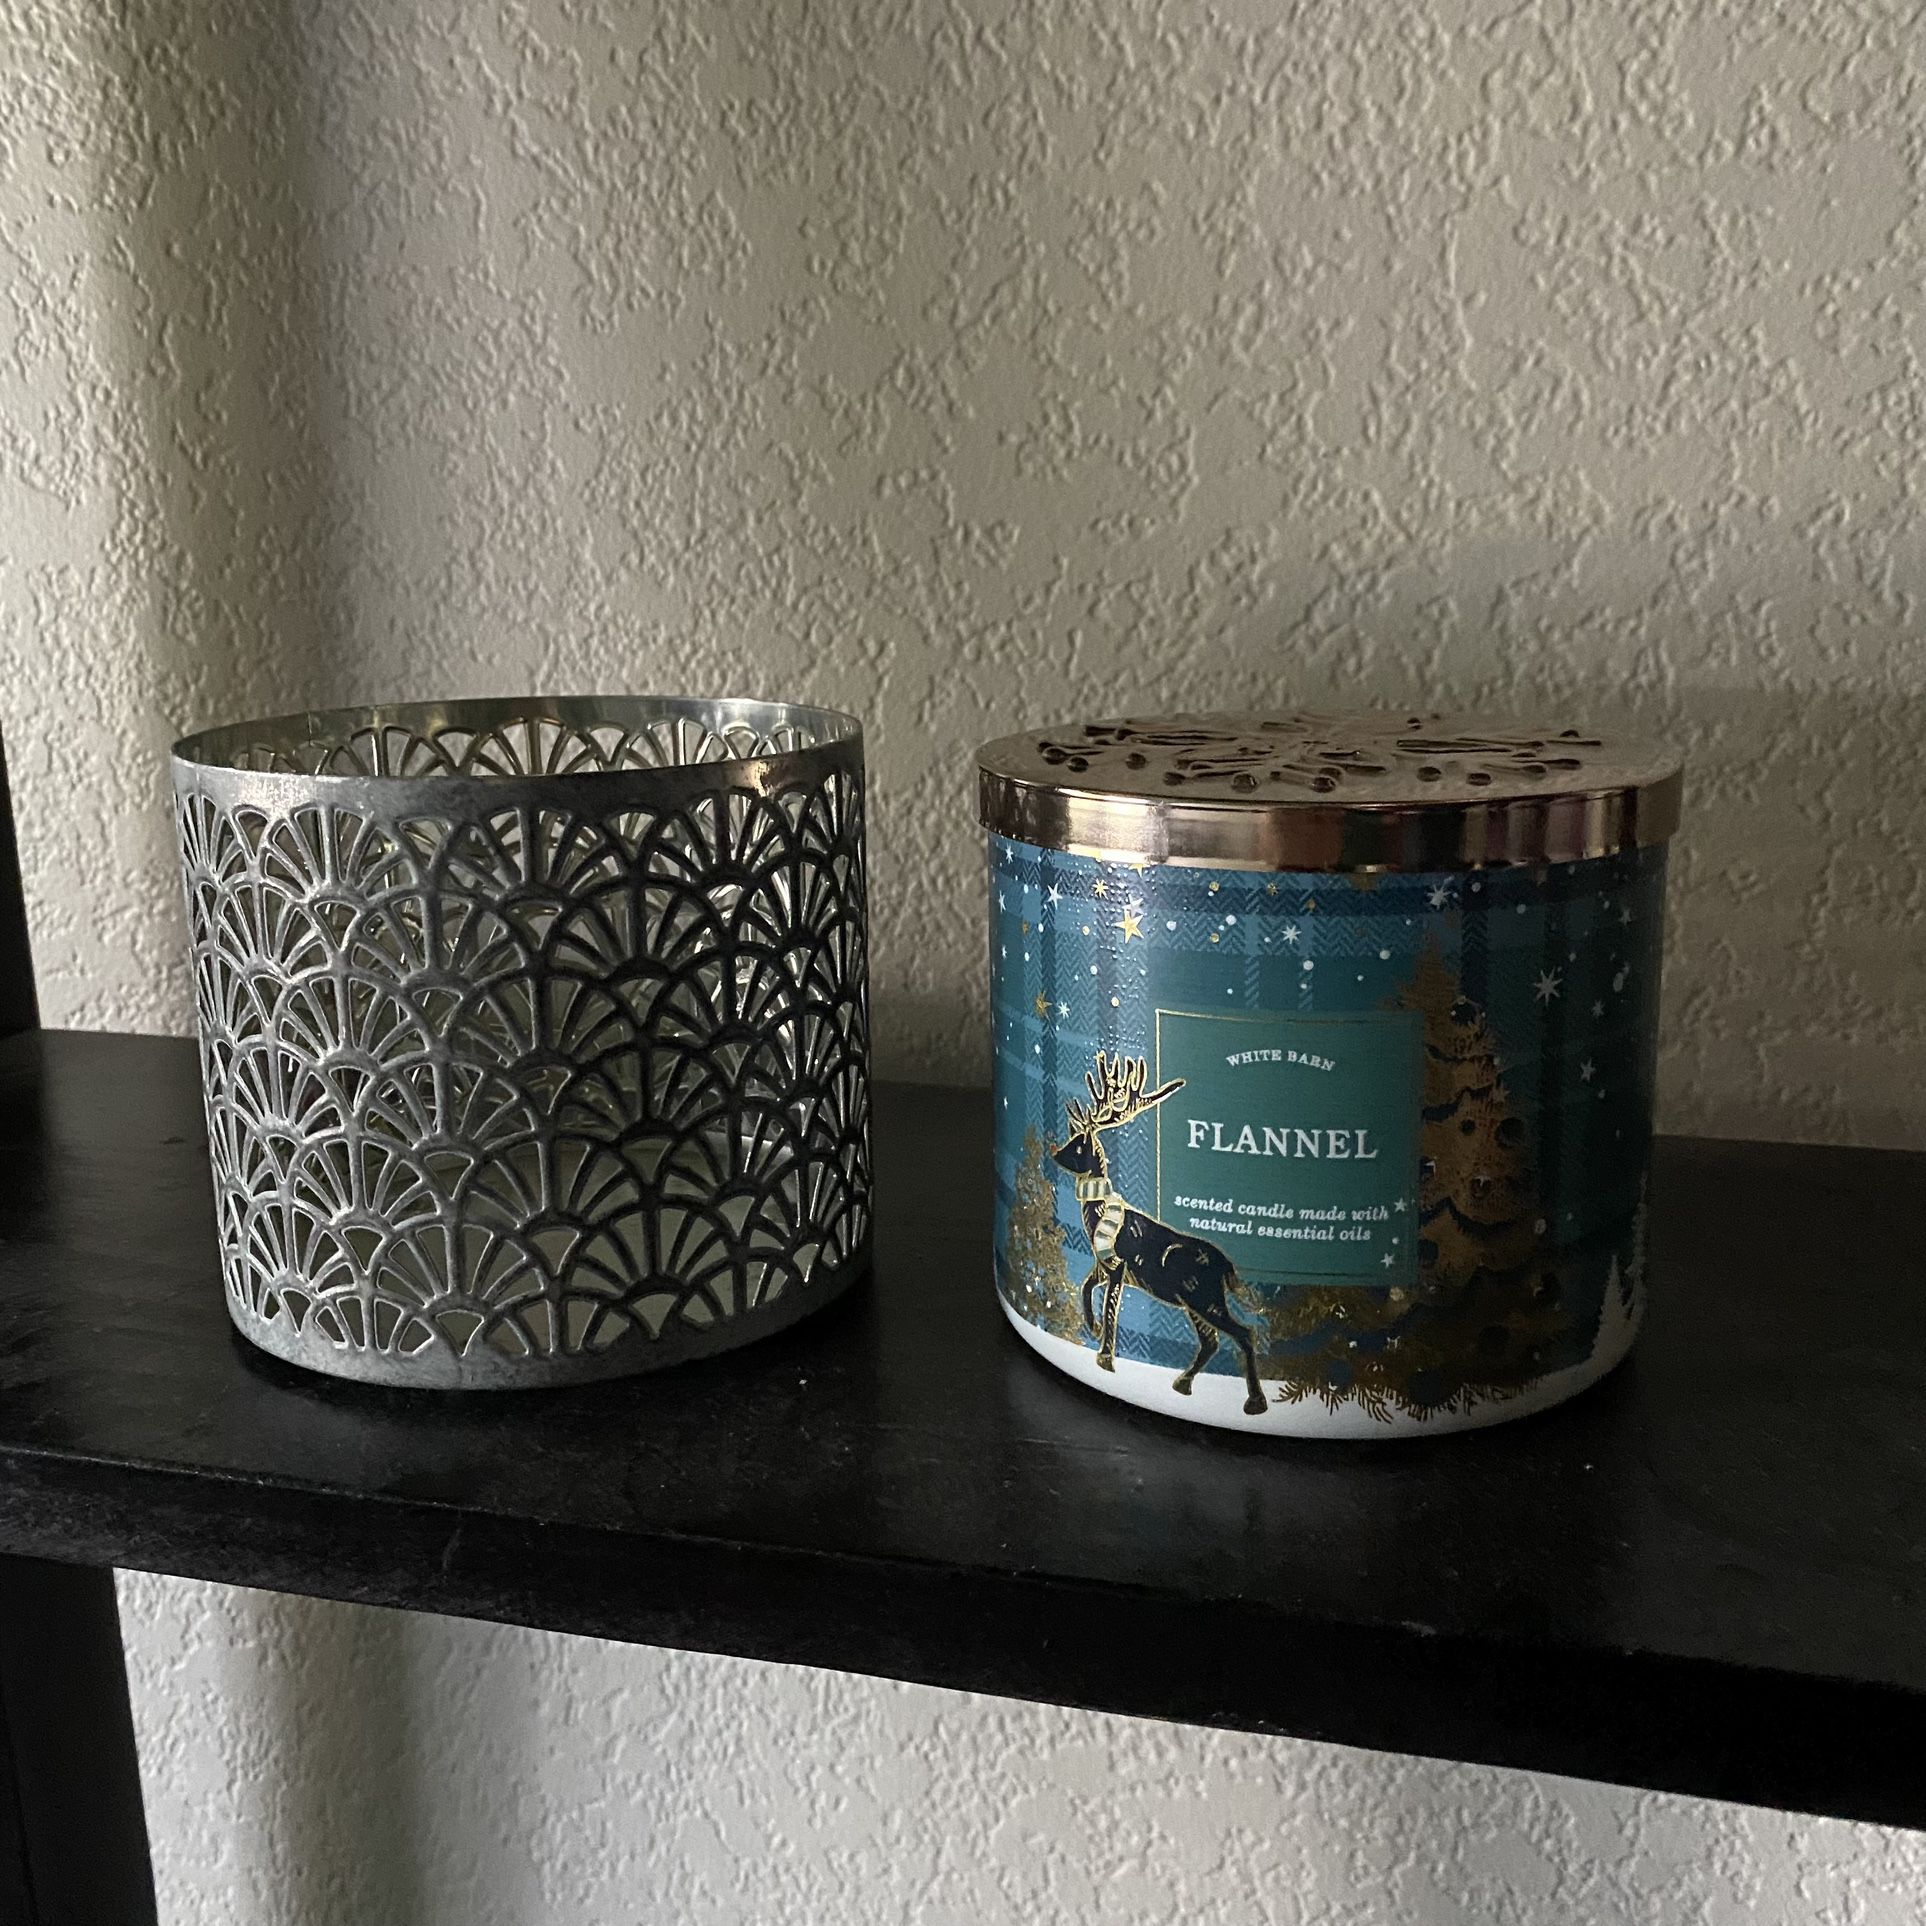 Bath and Body works candle and holder